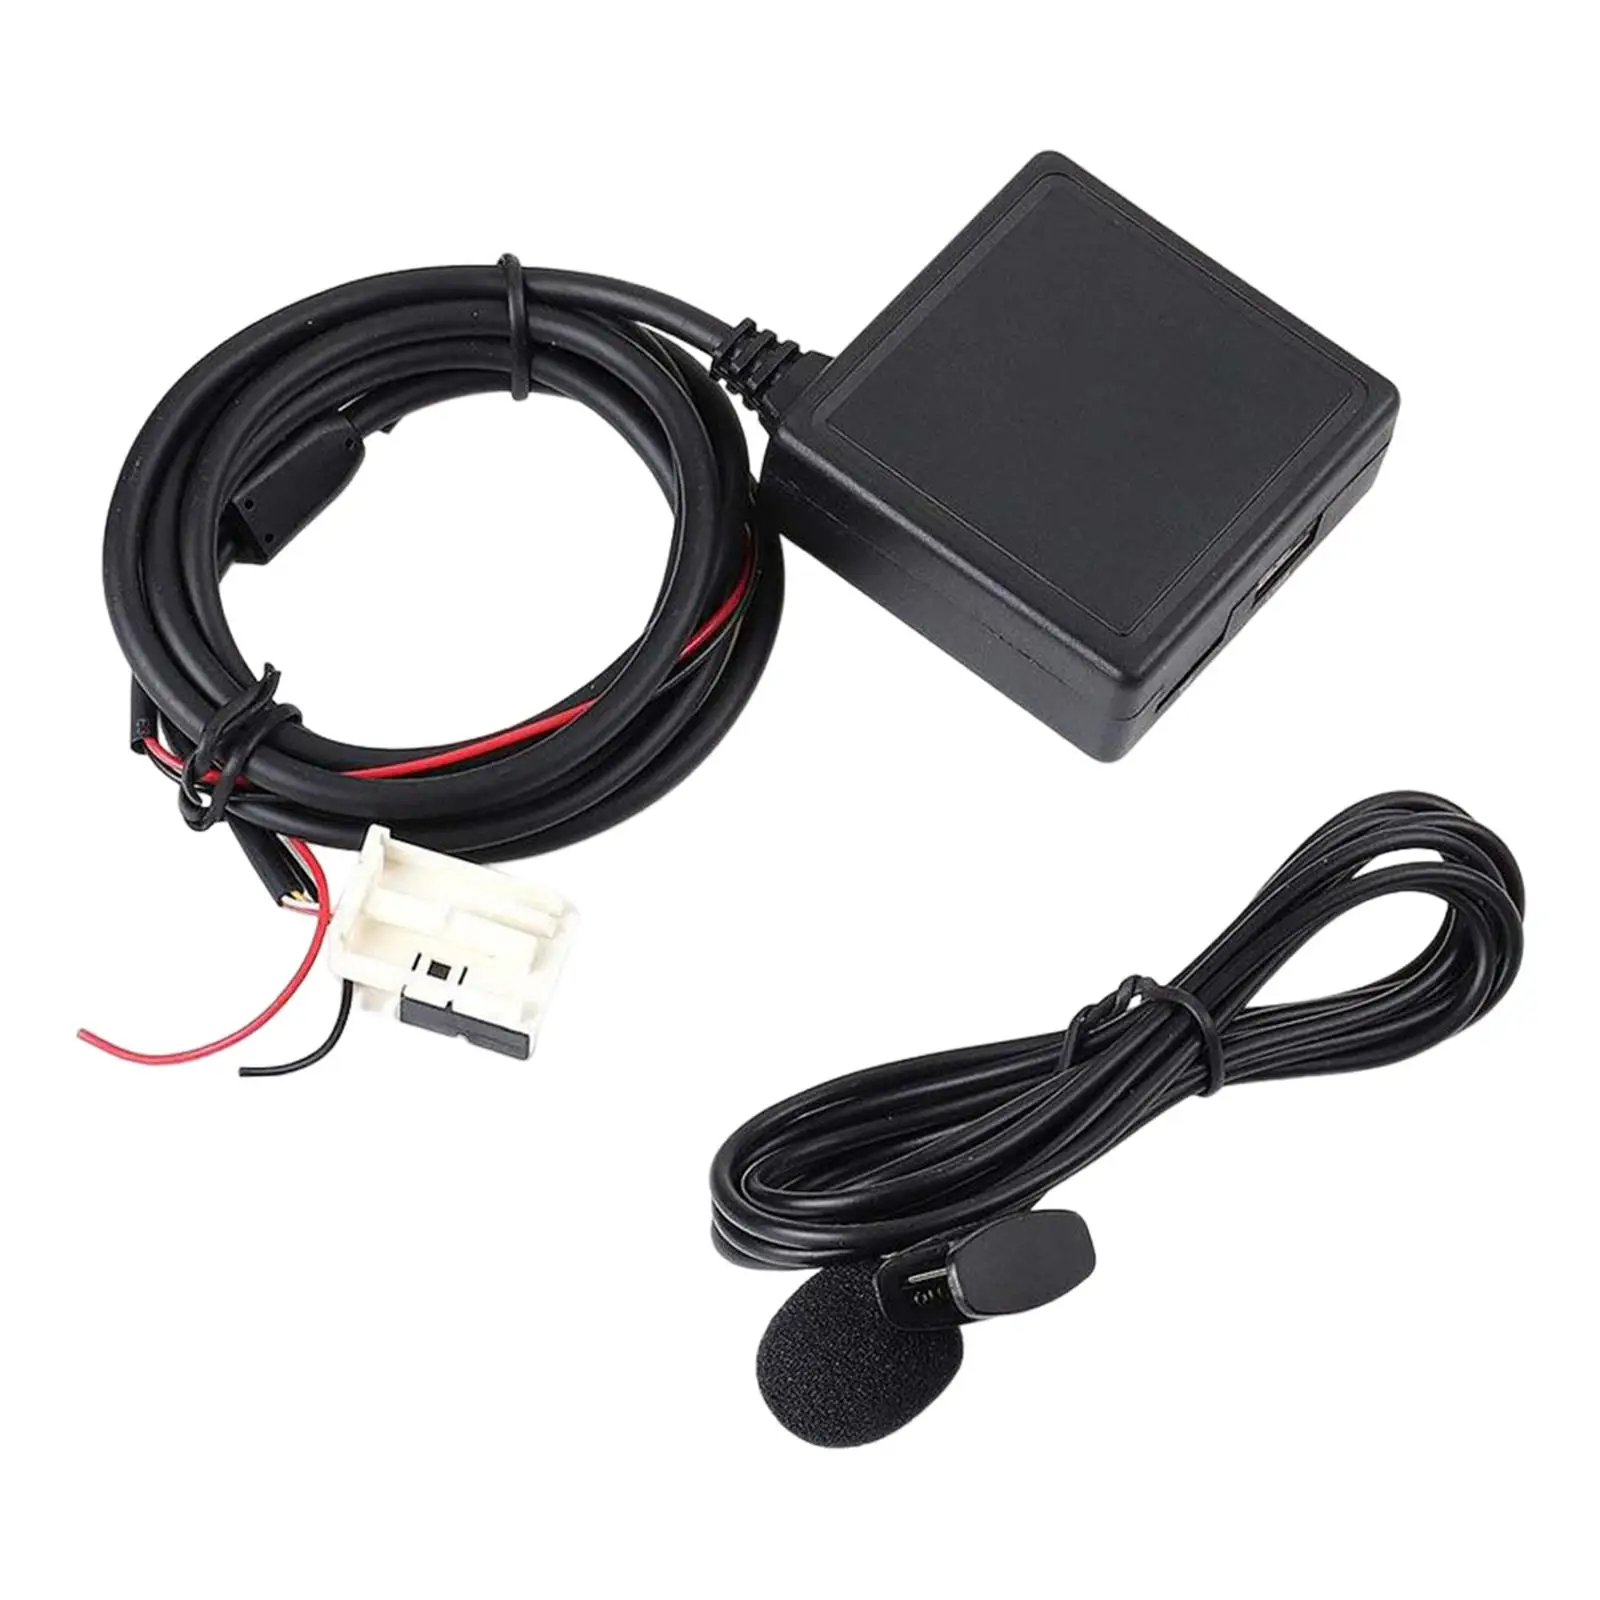 Auxiliary Audio Converter Support Handsfree Call with Microphone for E90 E60